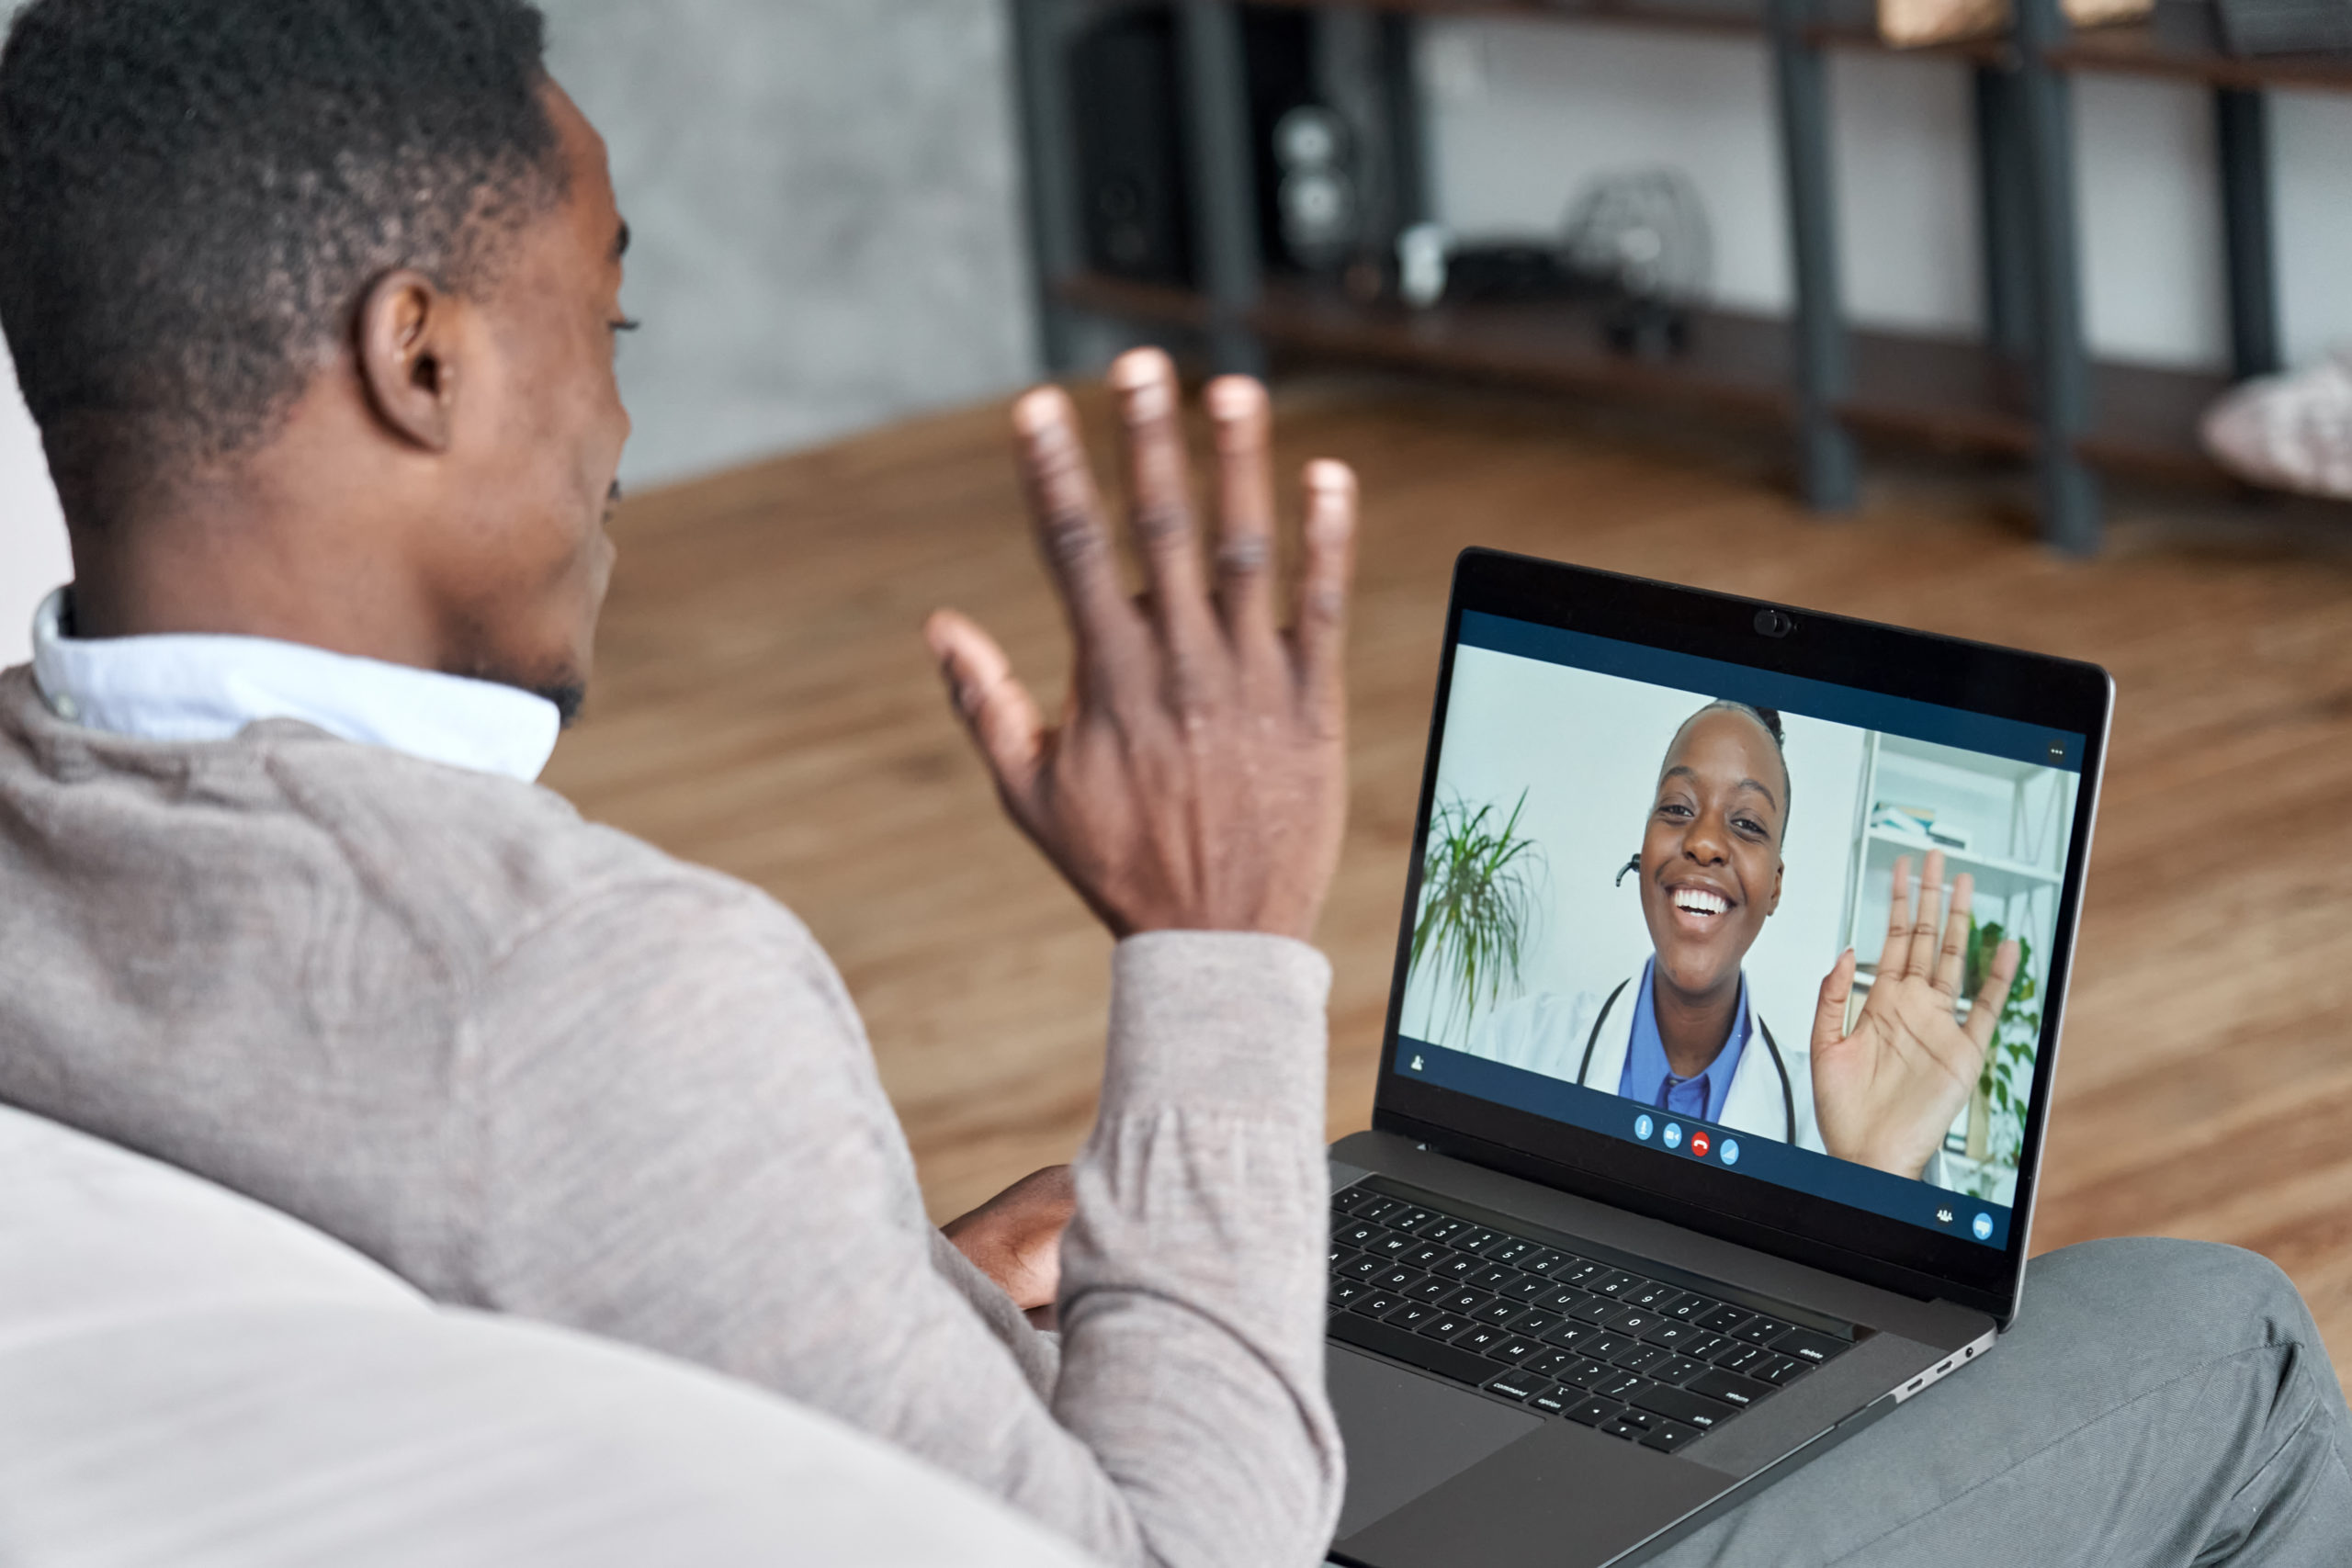 A male patient waves to his doctor during a telehealth video conference.